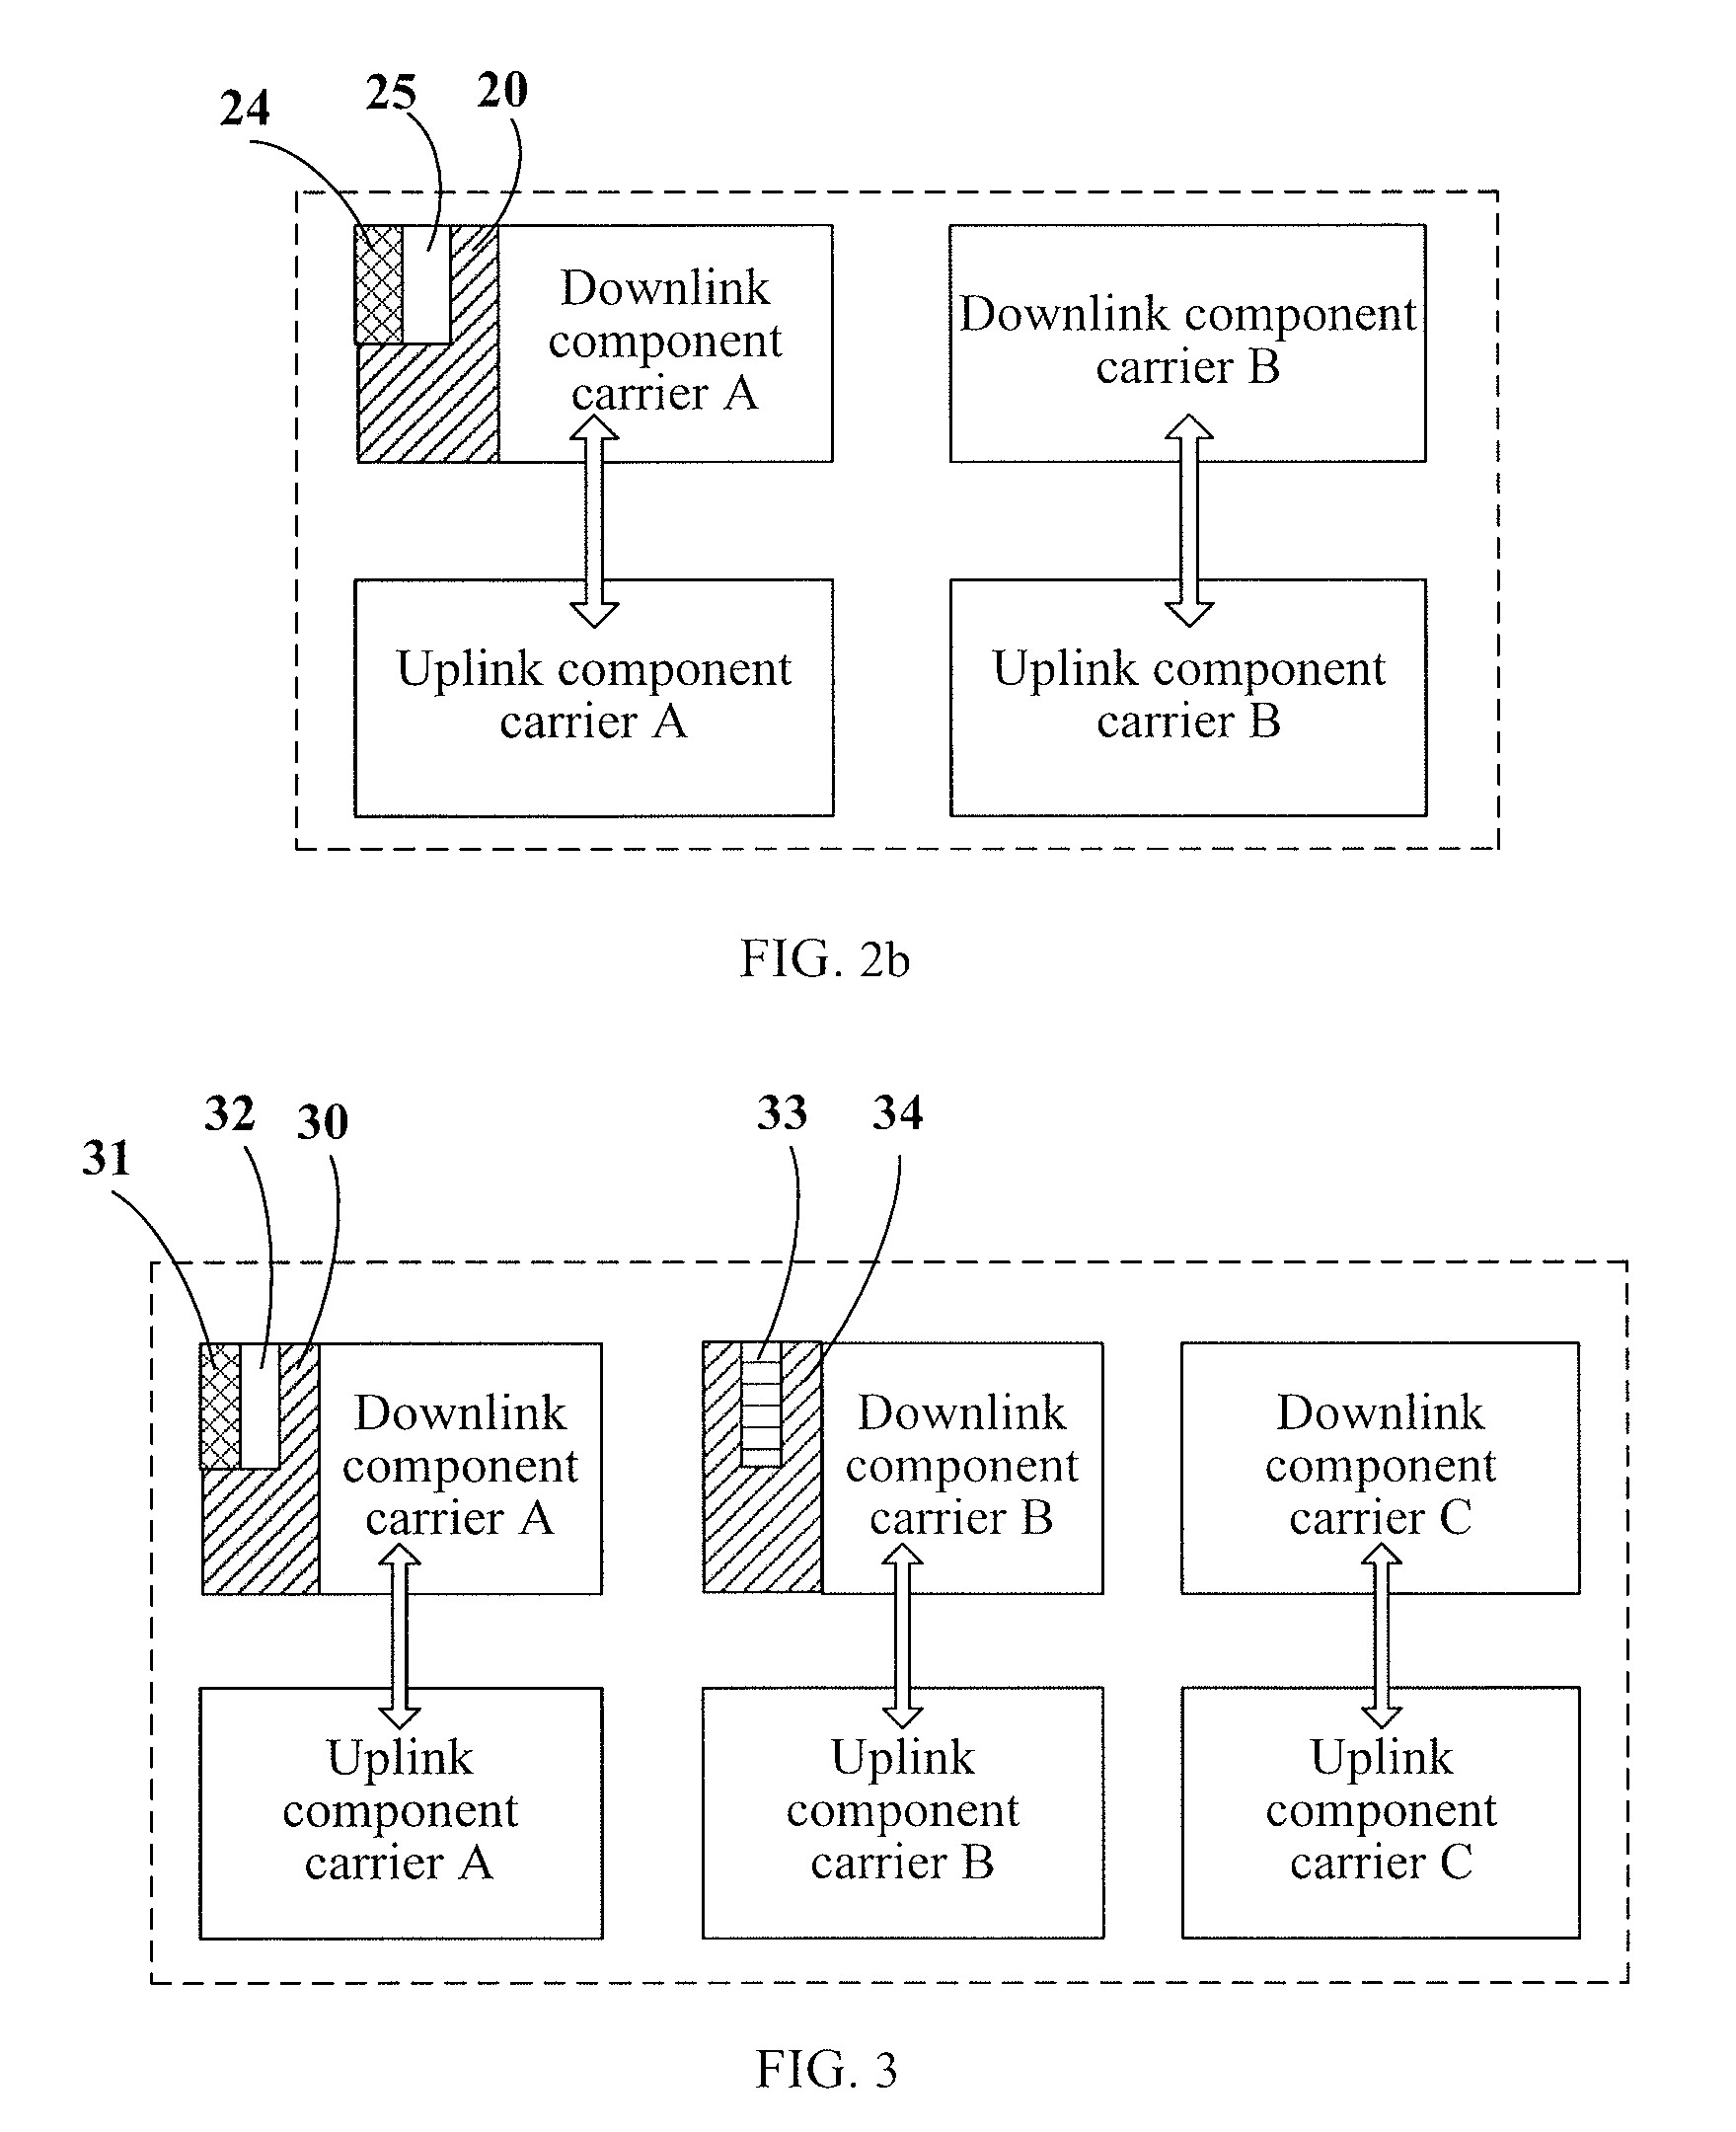 Method and apparatus for mapping and detecting control channel